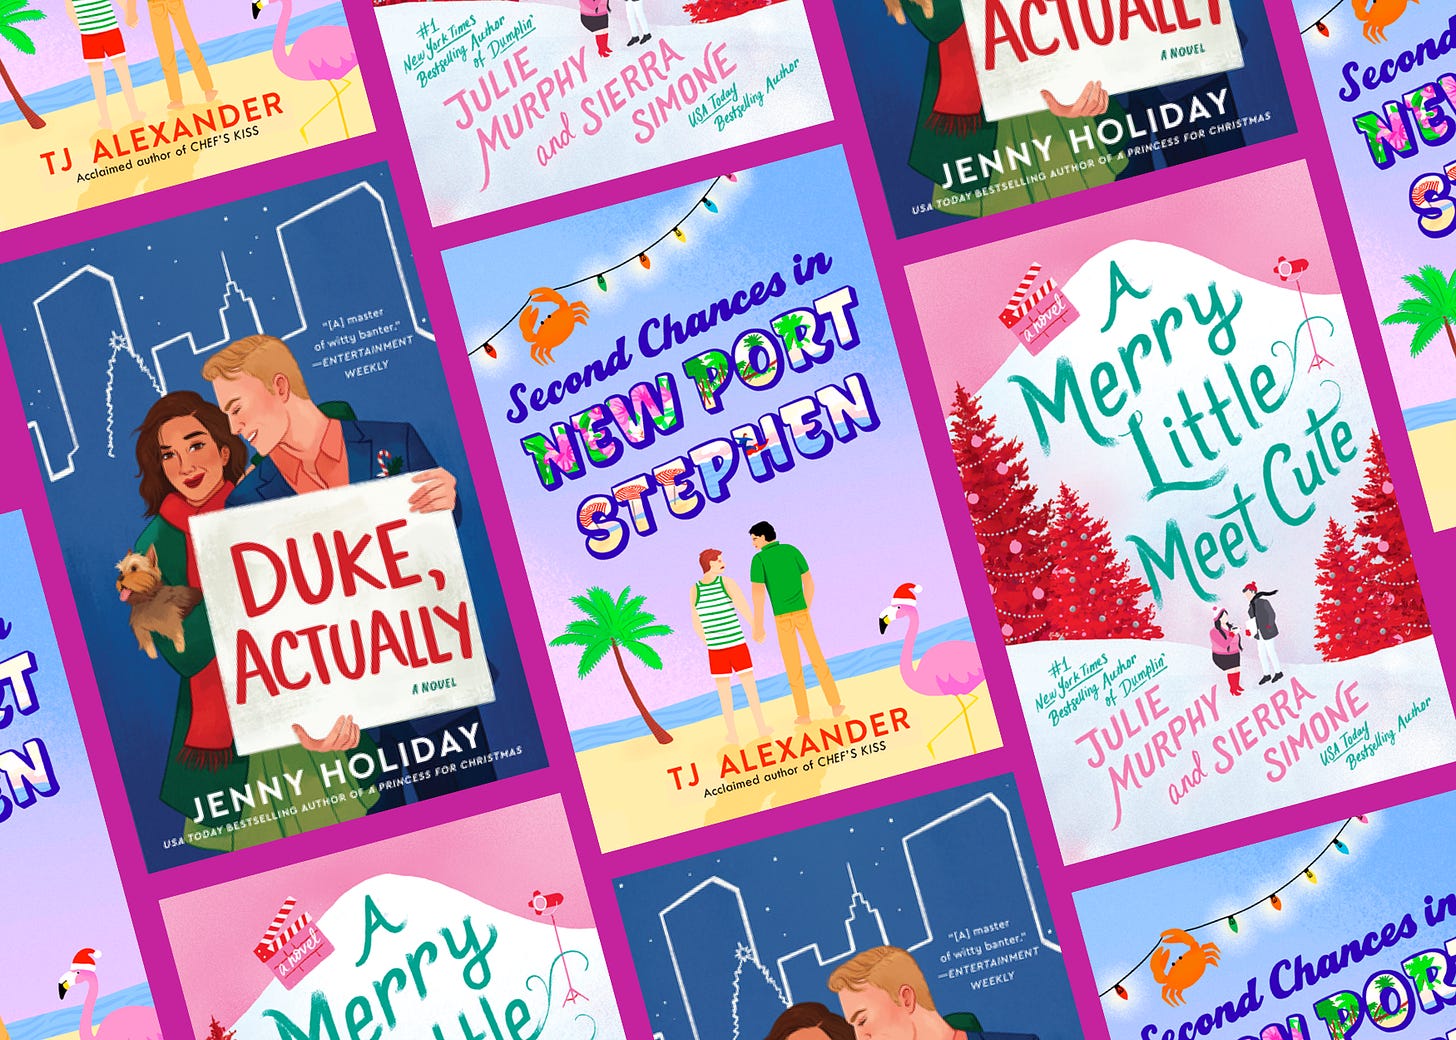 A collage of book covers: Duke, Actually by Jenny Holiday; Second Chance in New Port Stephen by TJ Alexander; and A Merry Little Meet Cute by Julie Murphy and Sierra Simone.